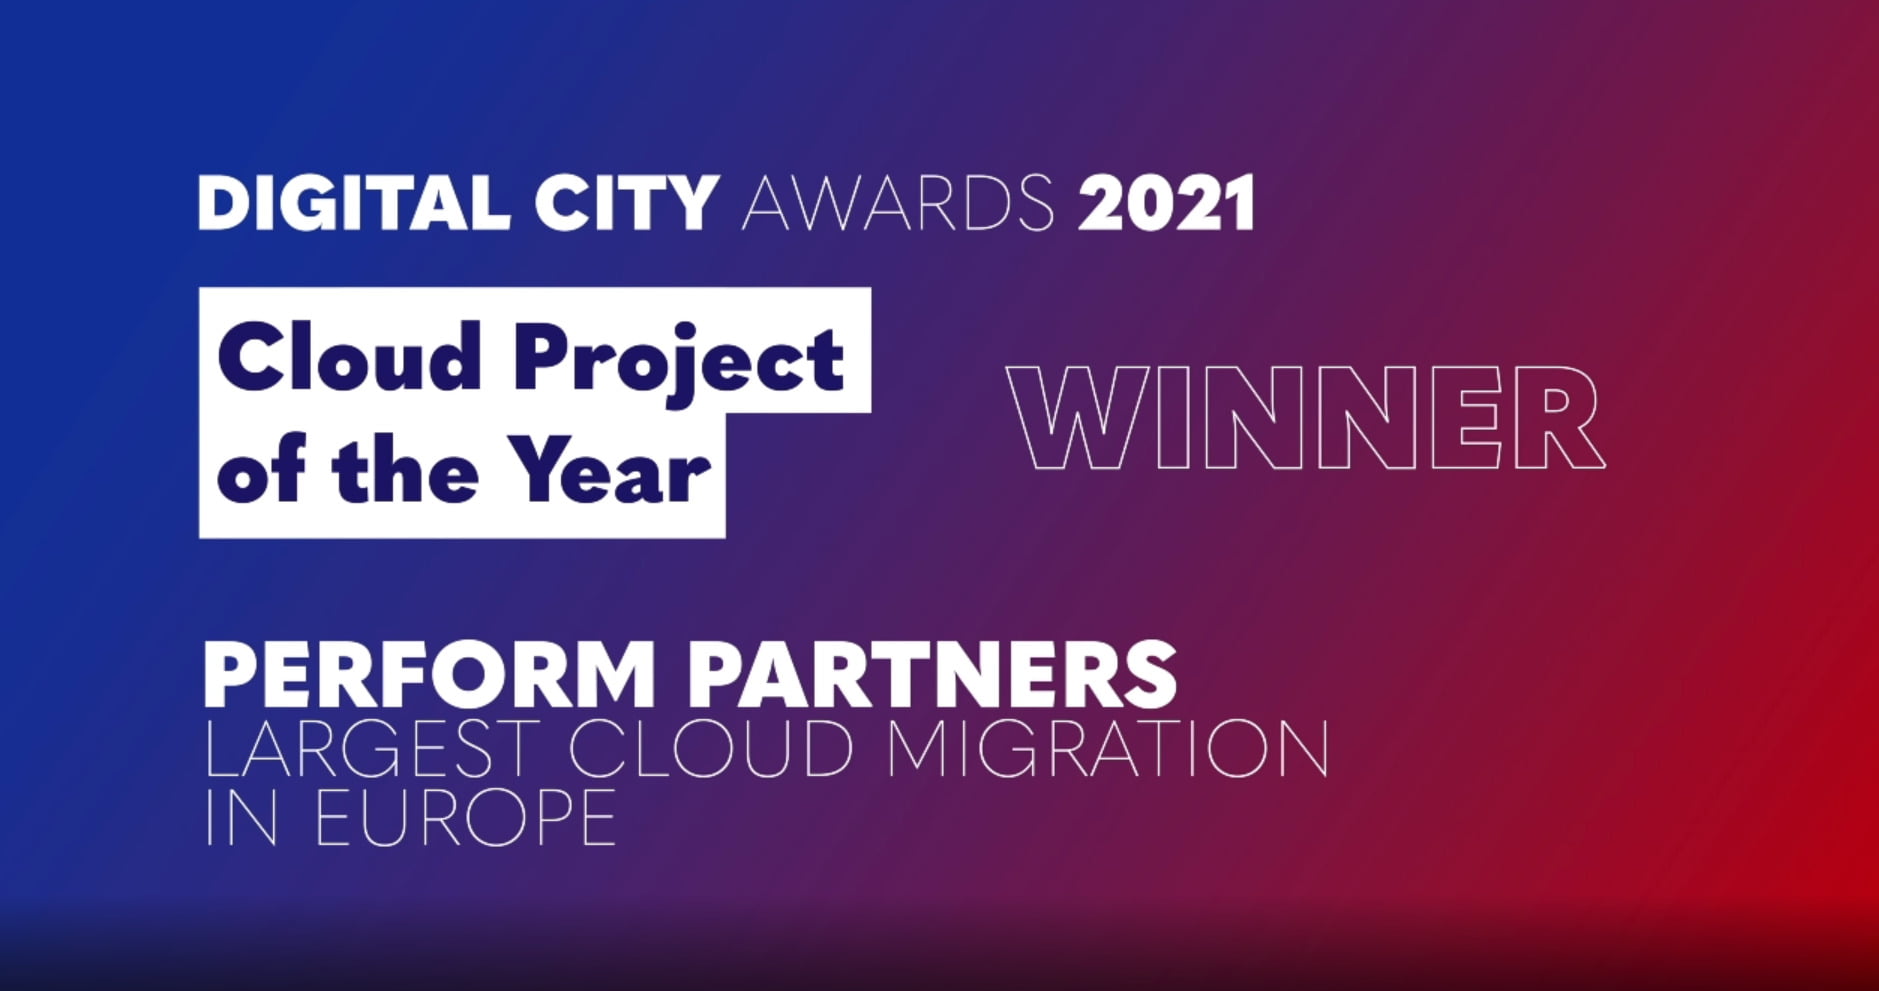 Win Cloud Project of the Year Award